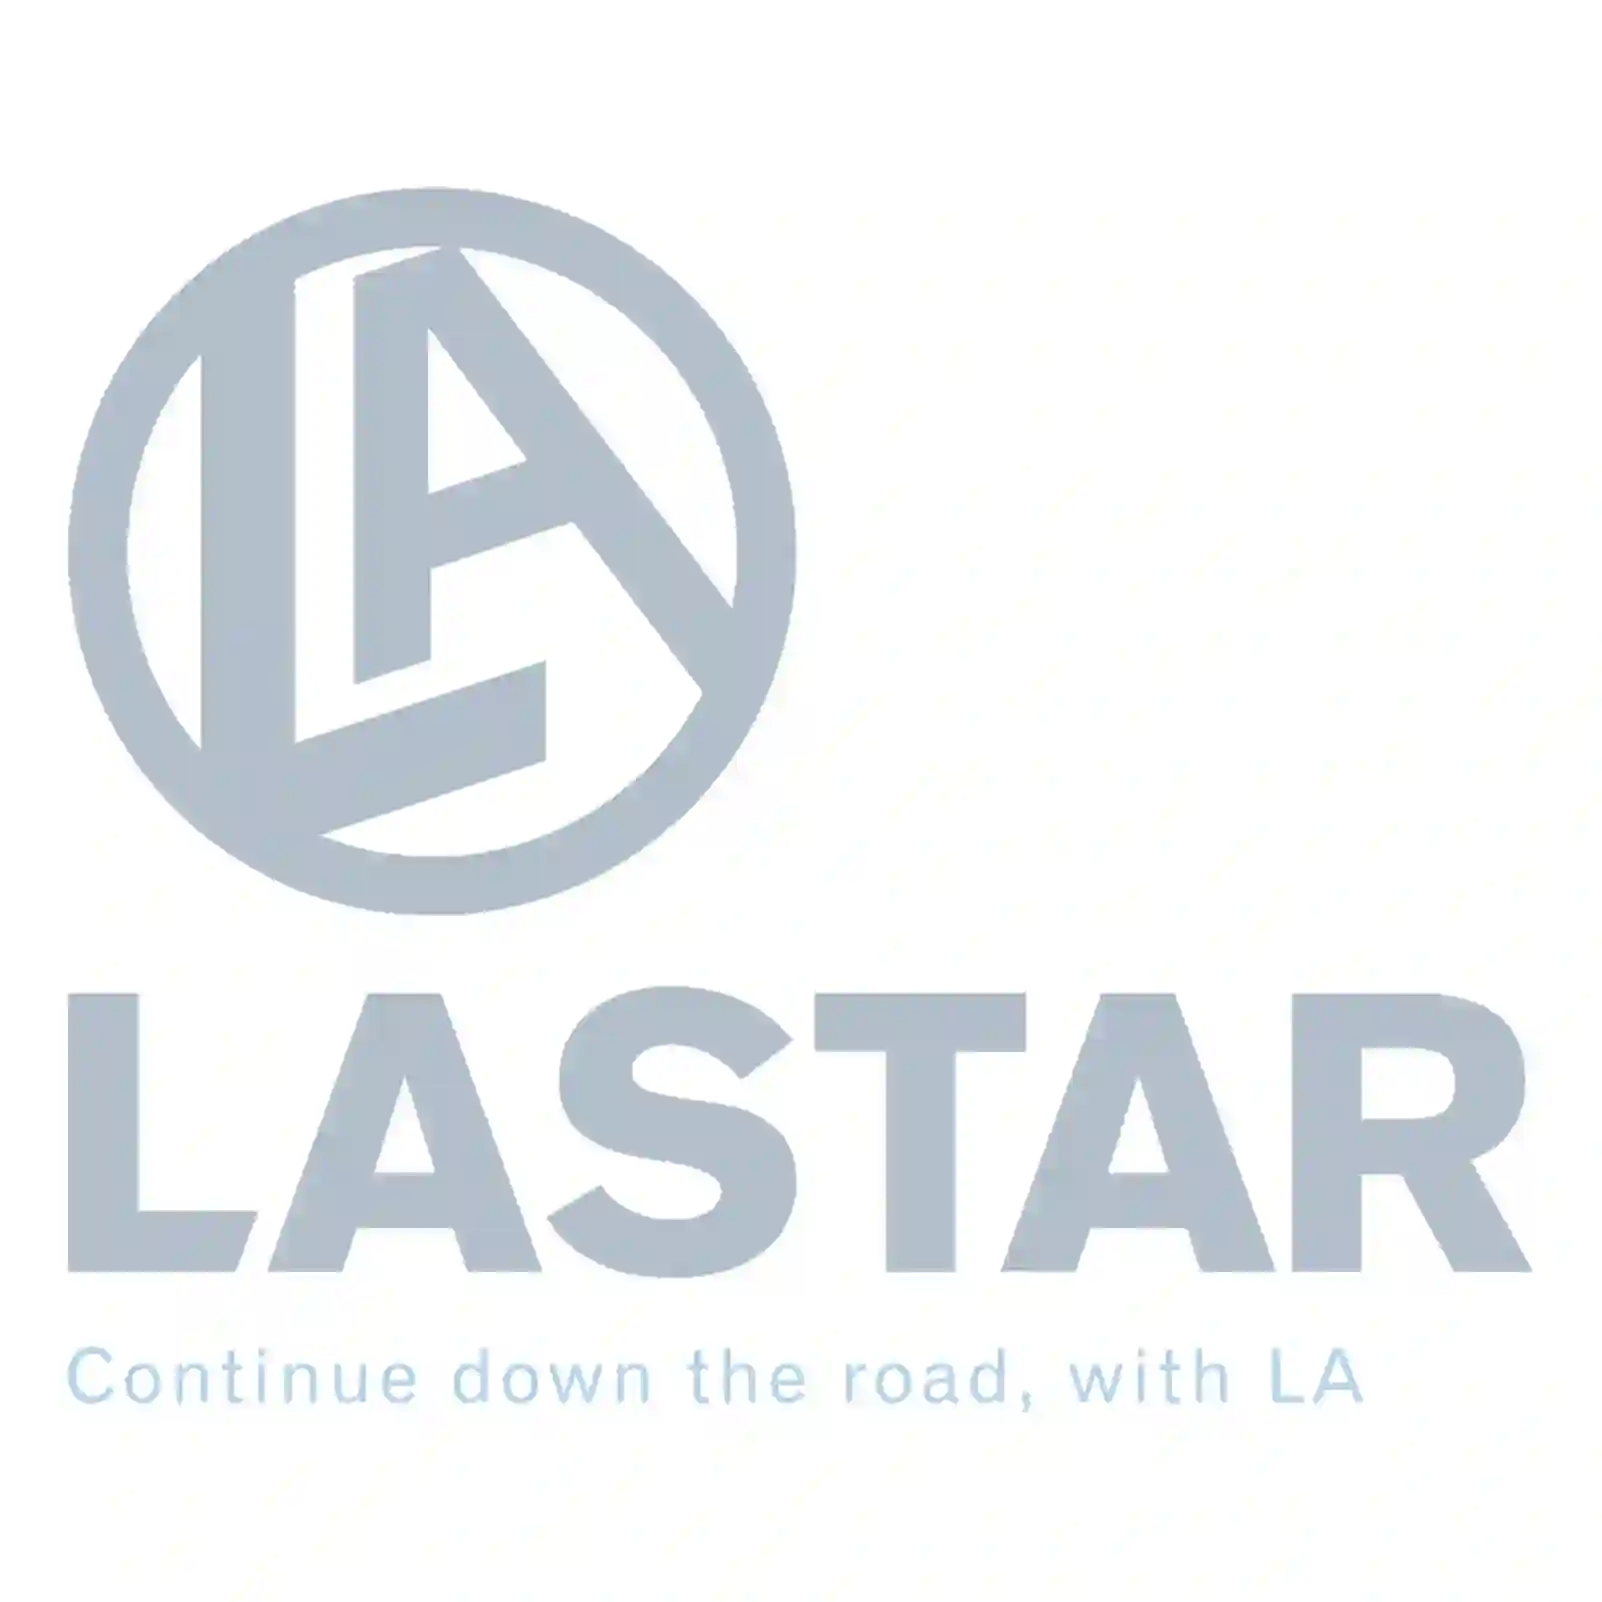  Lamp frame, right || Lastar Spare Part | Truck Spare Parts, Auotomotive Spare Parts